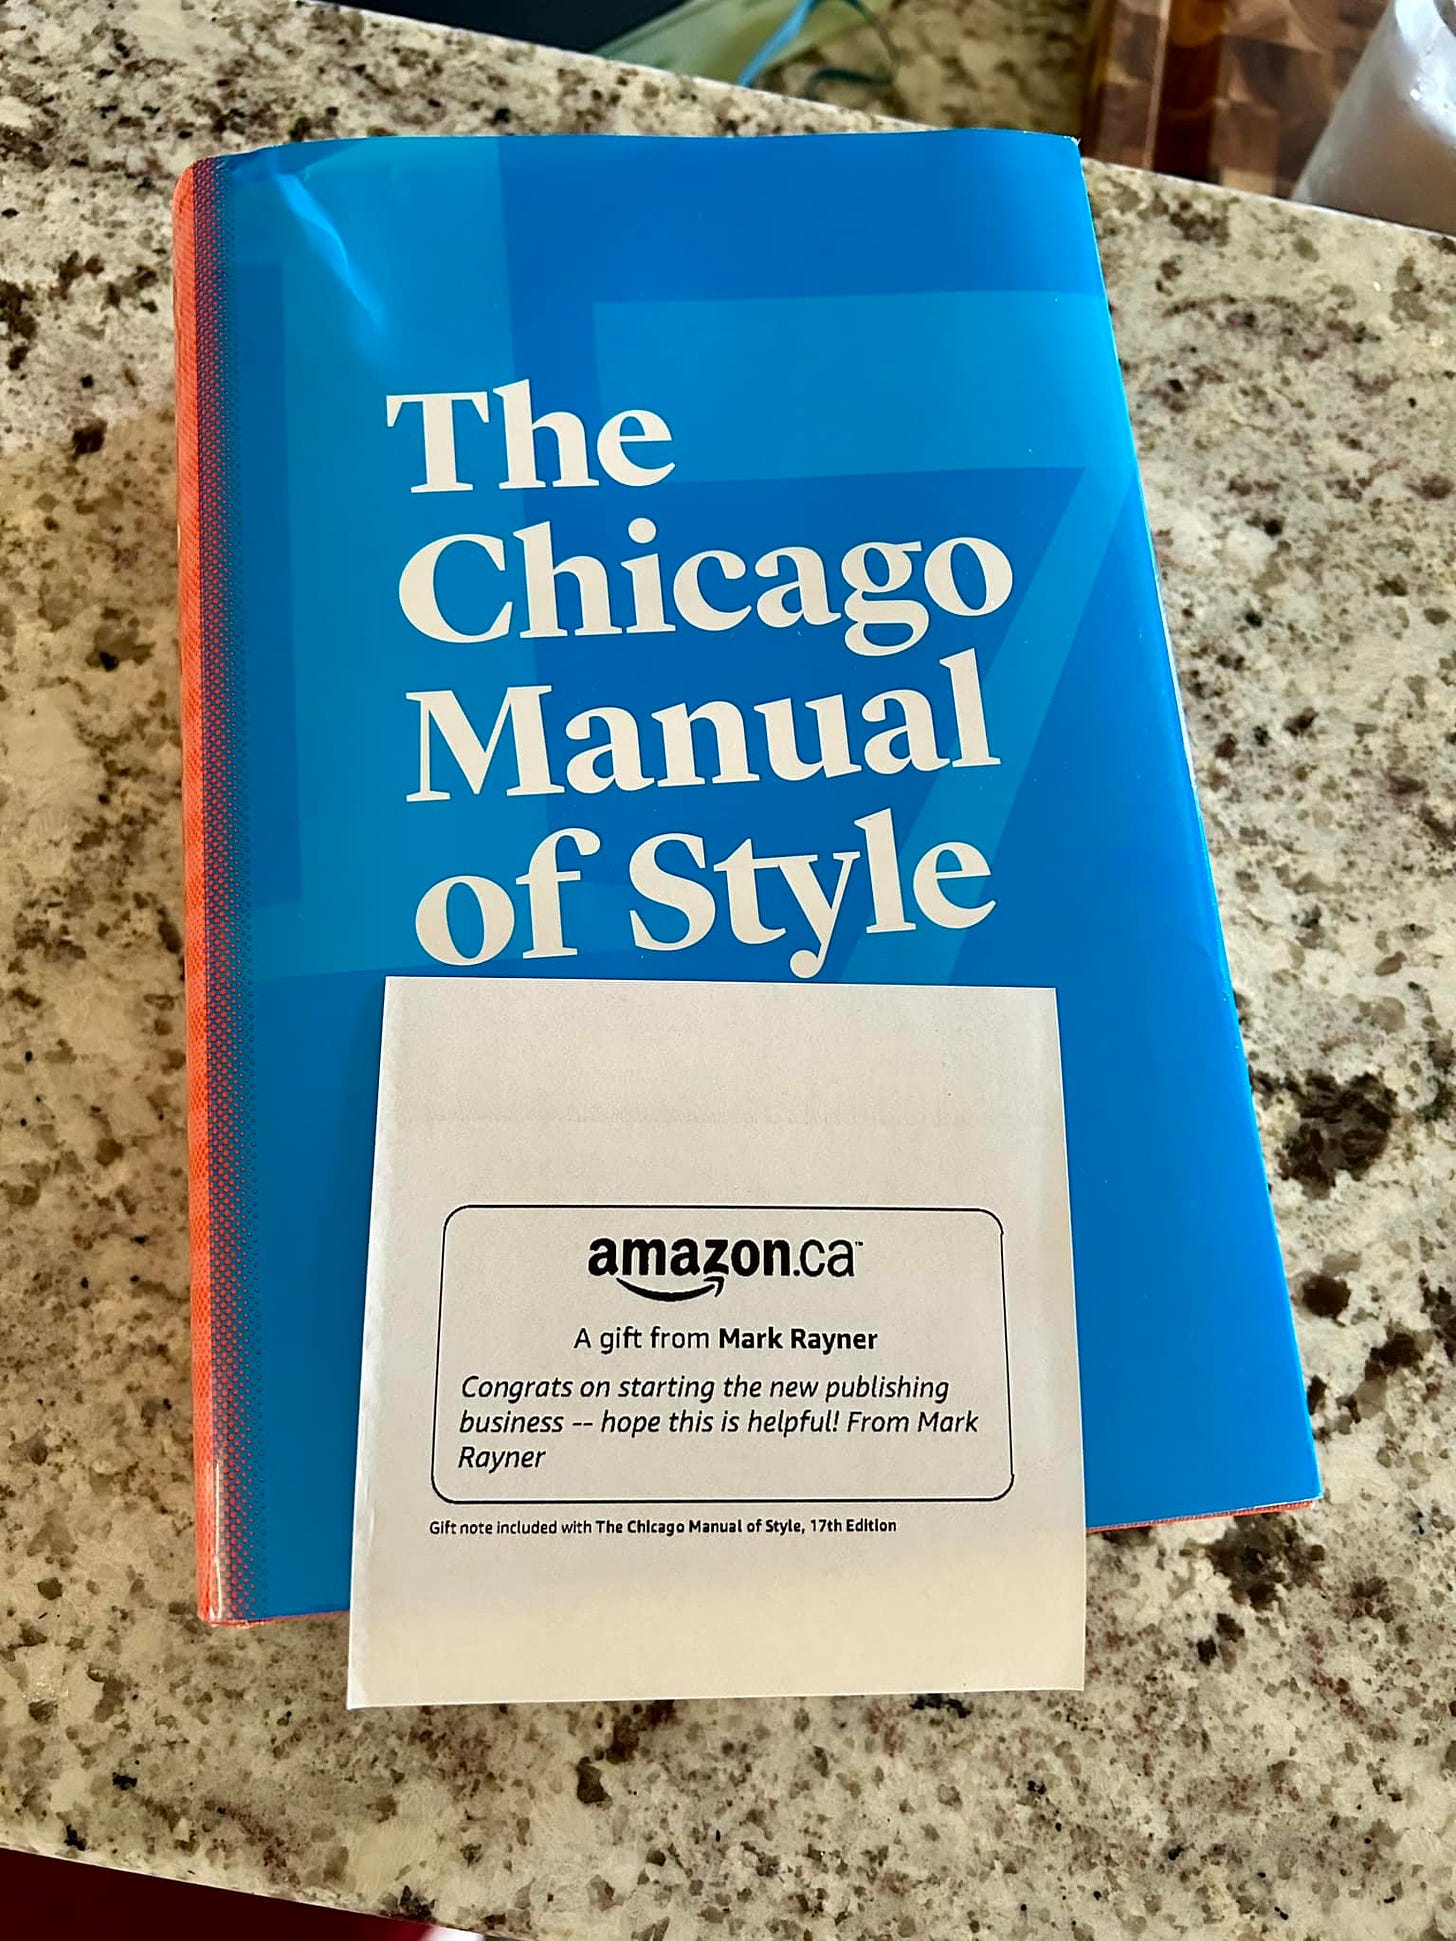 A copy of the Chicago Manual of Style along with a card from Amazon indicating it's a gift from Mark A Rayner